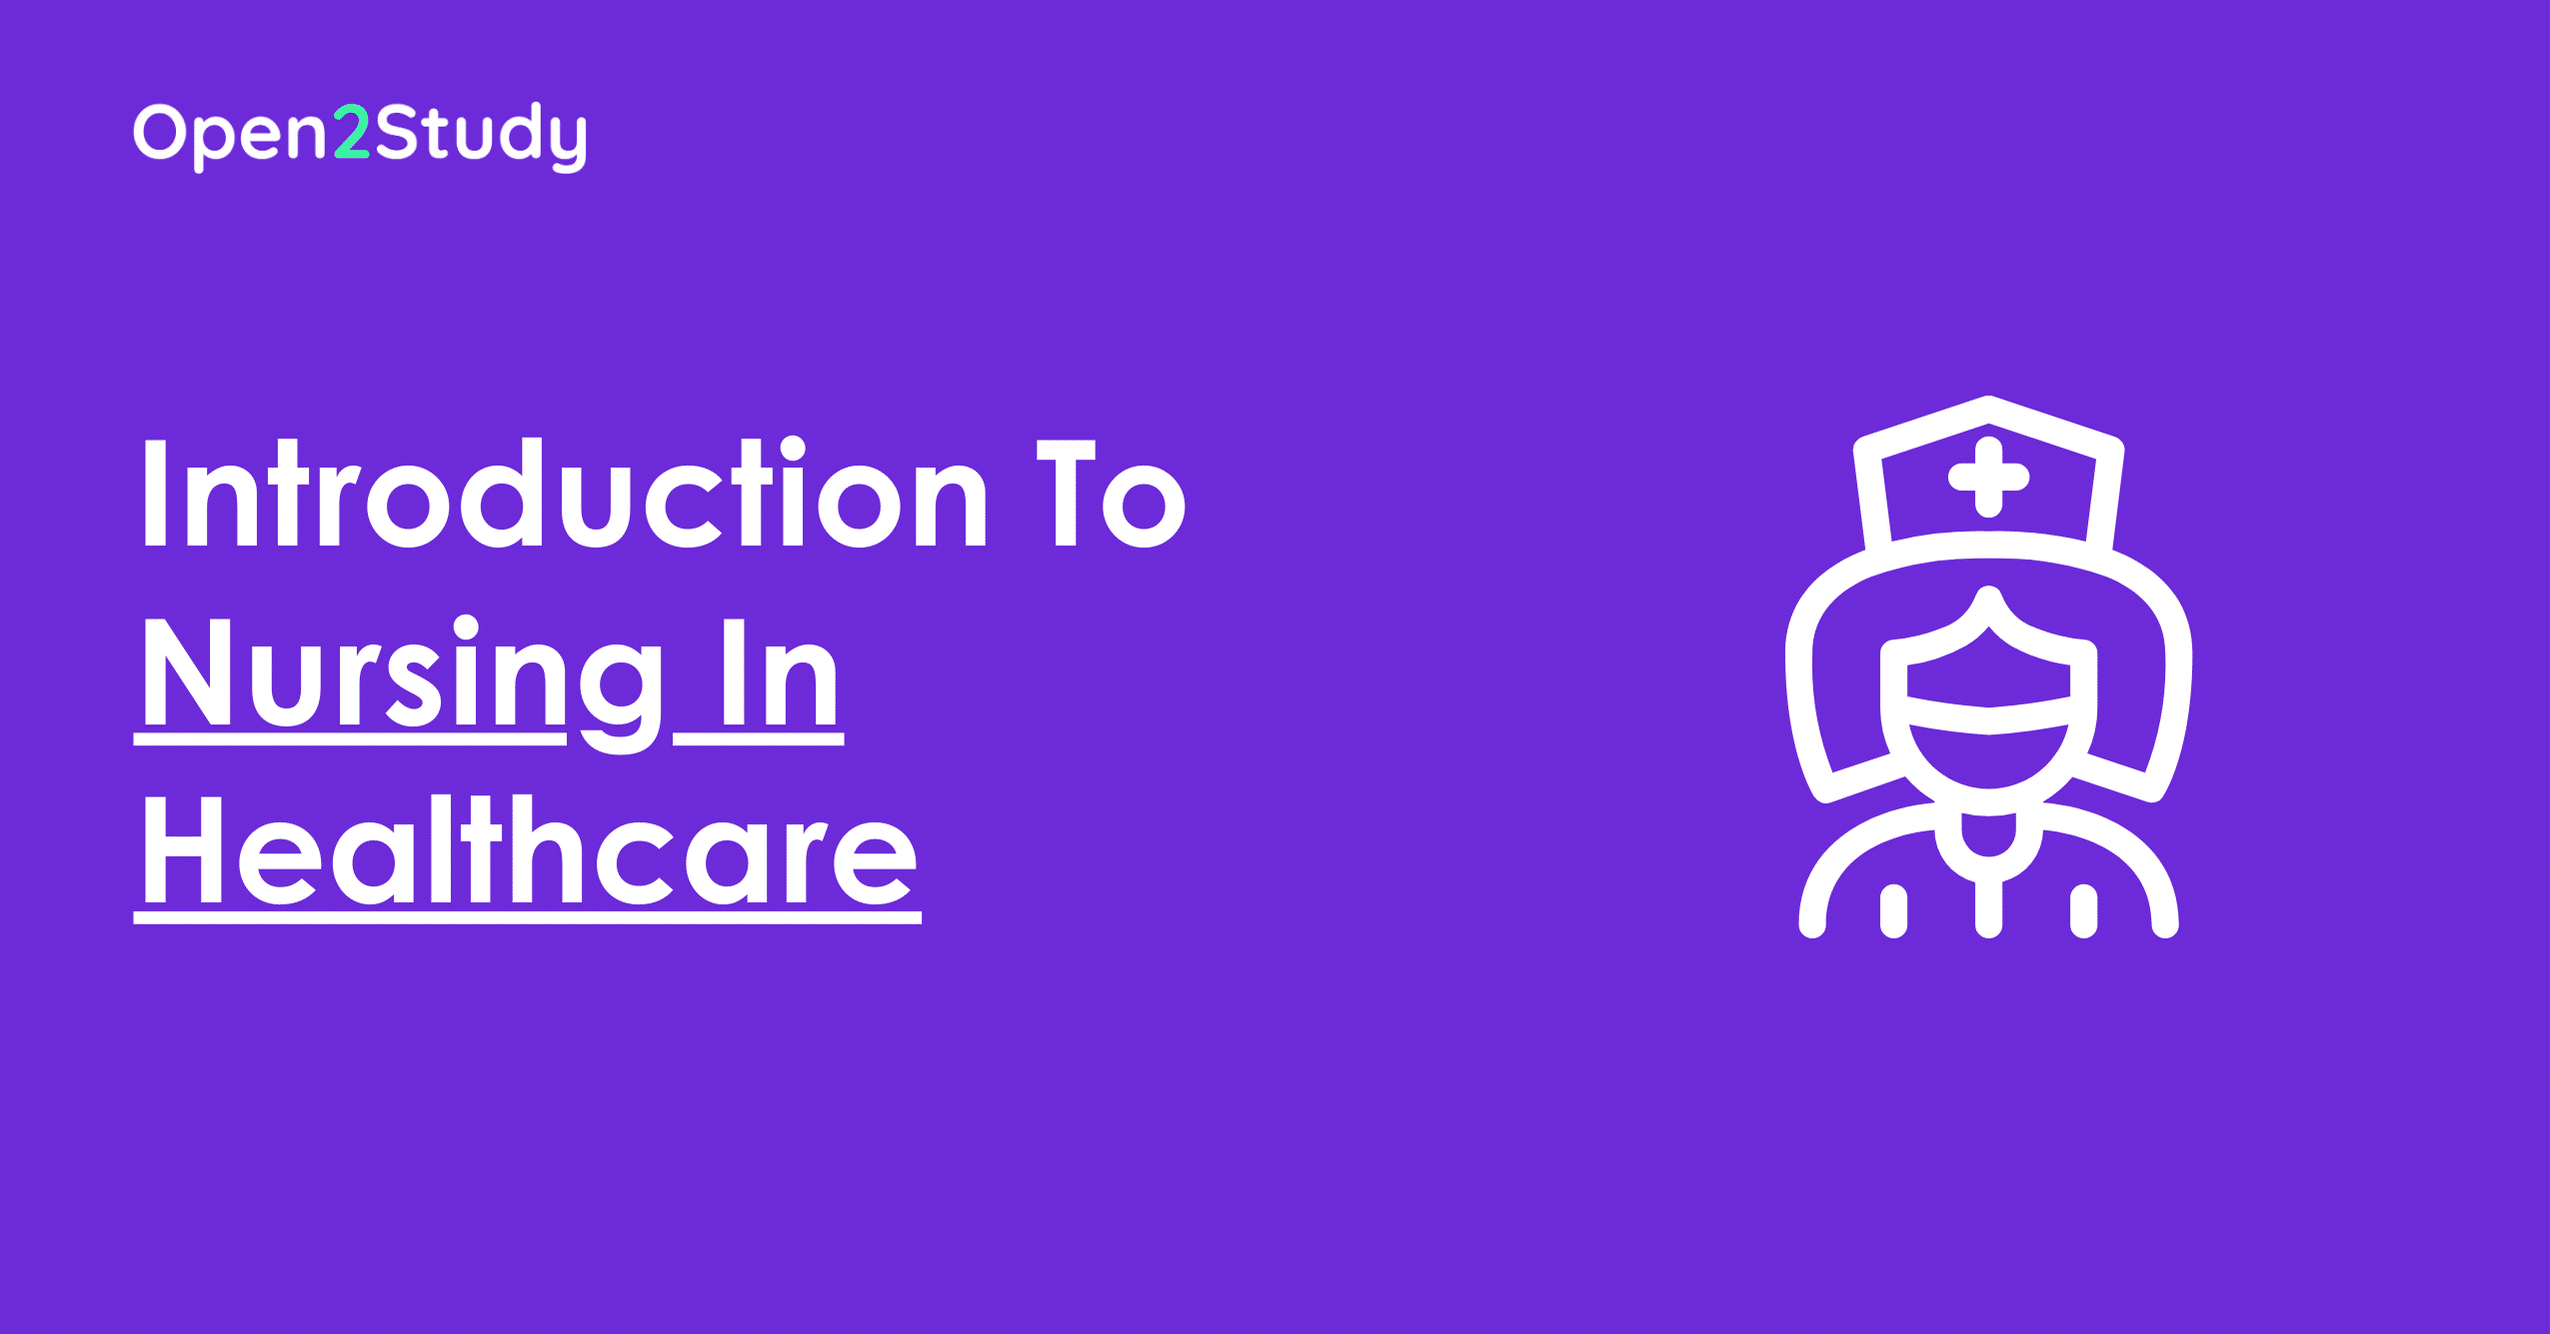 Introduction To Nursing In Healthcare